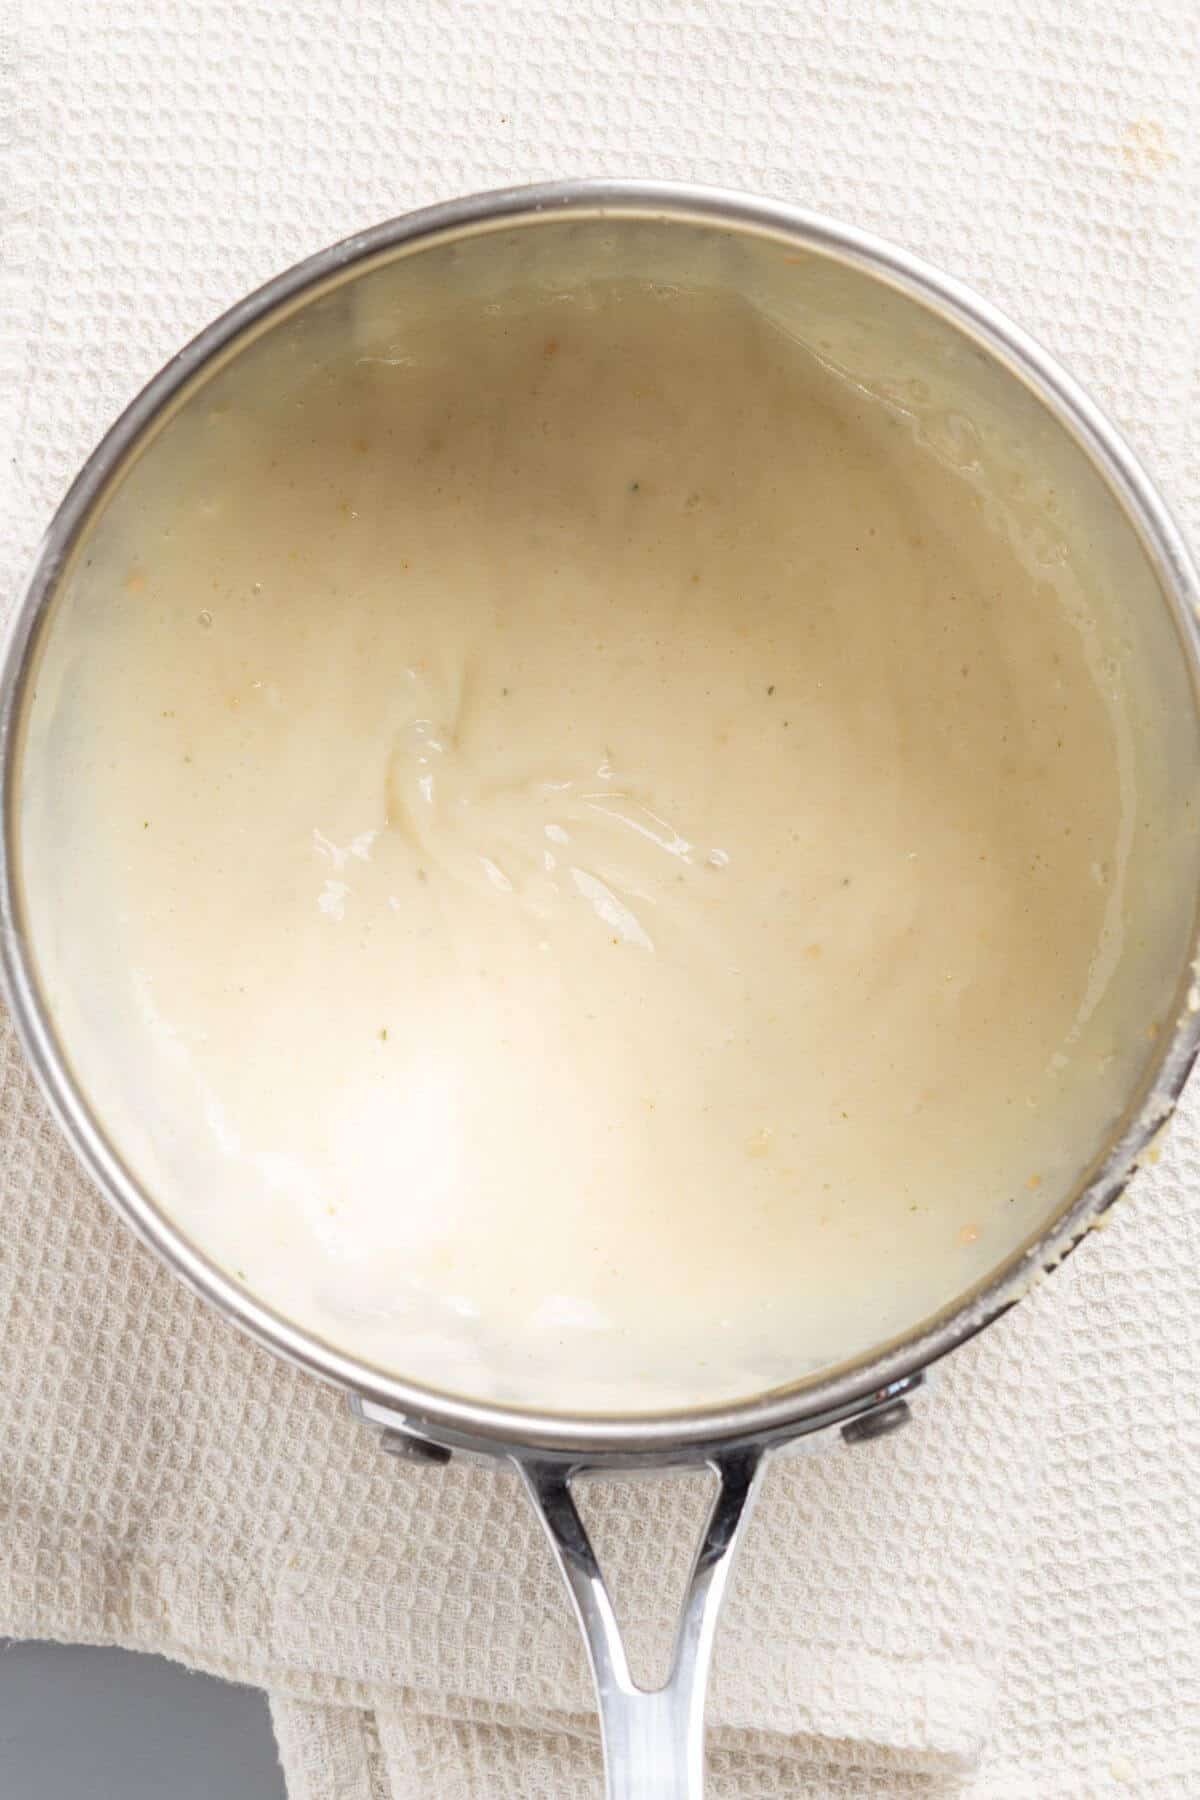 Thickened sauce mixture in skillet.